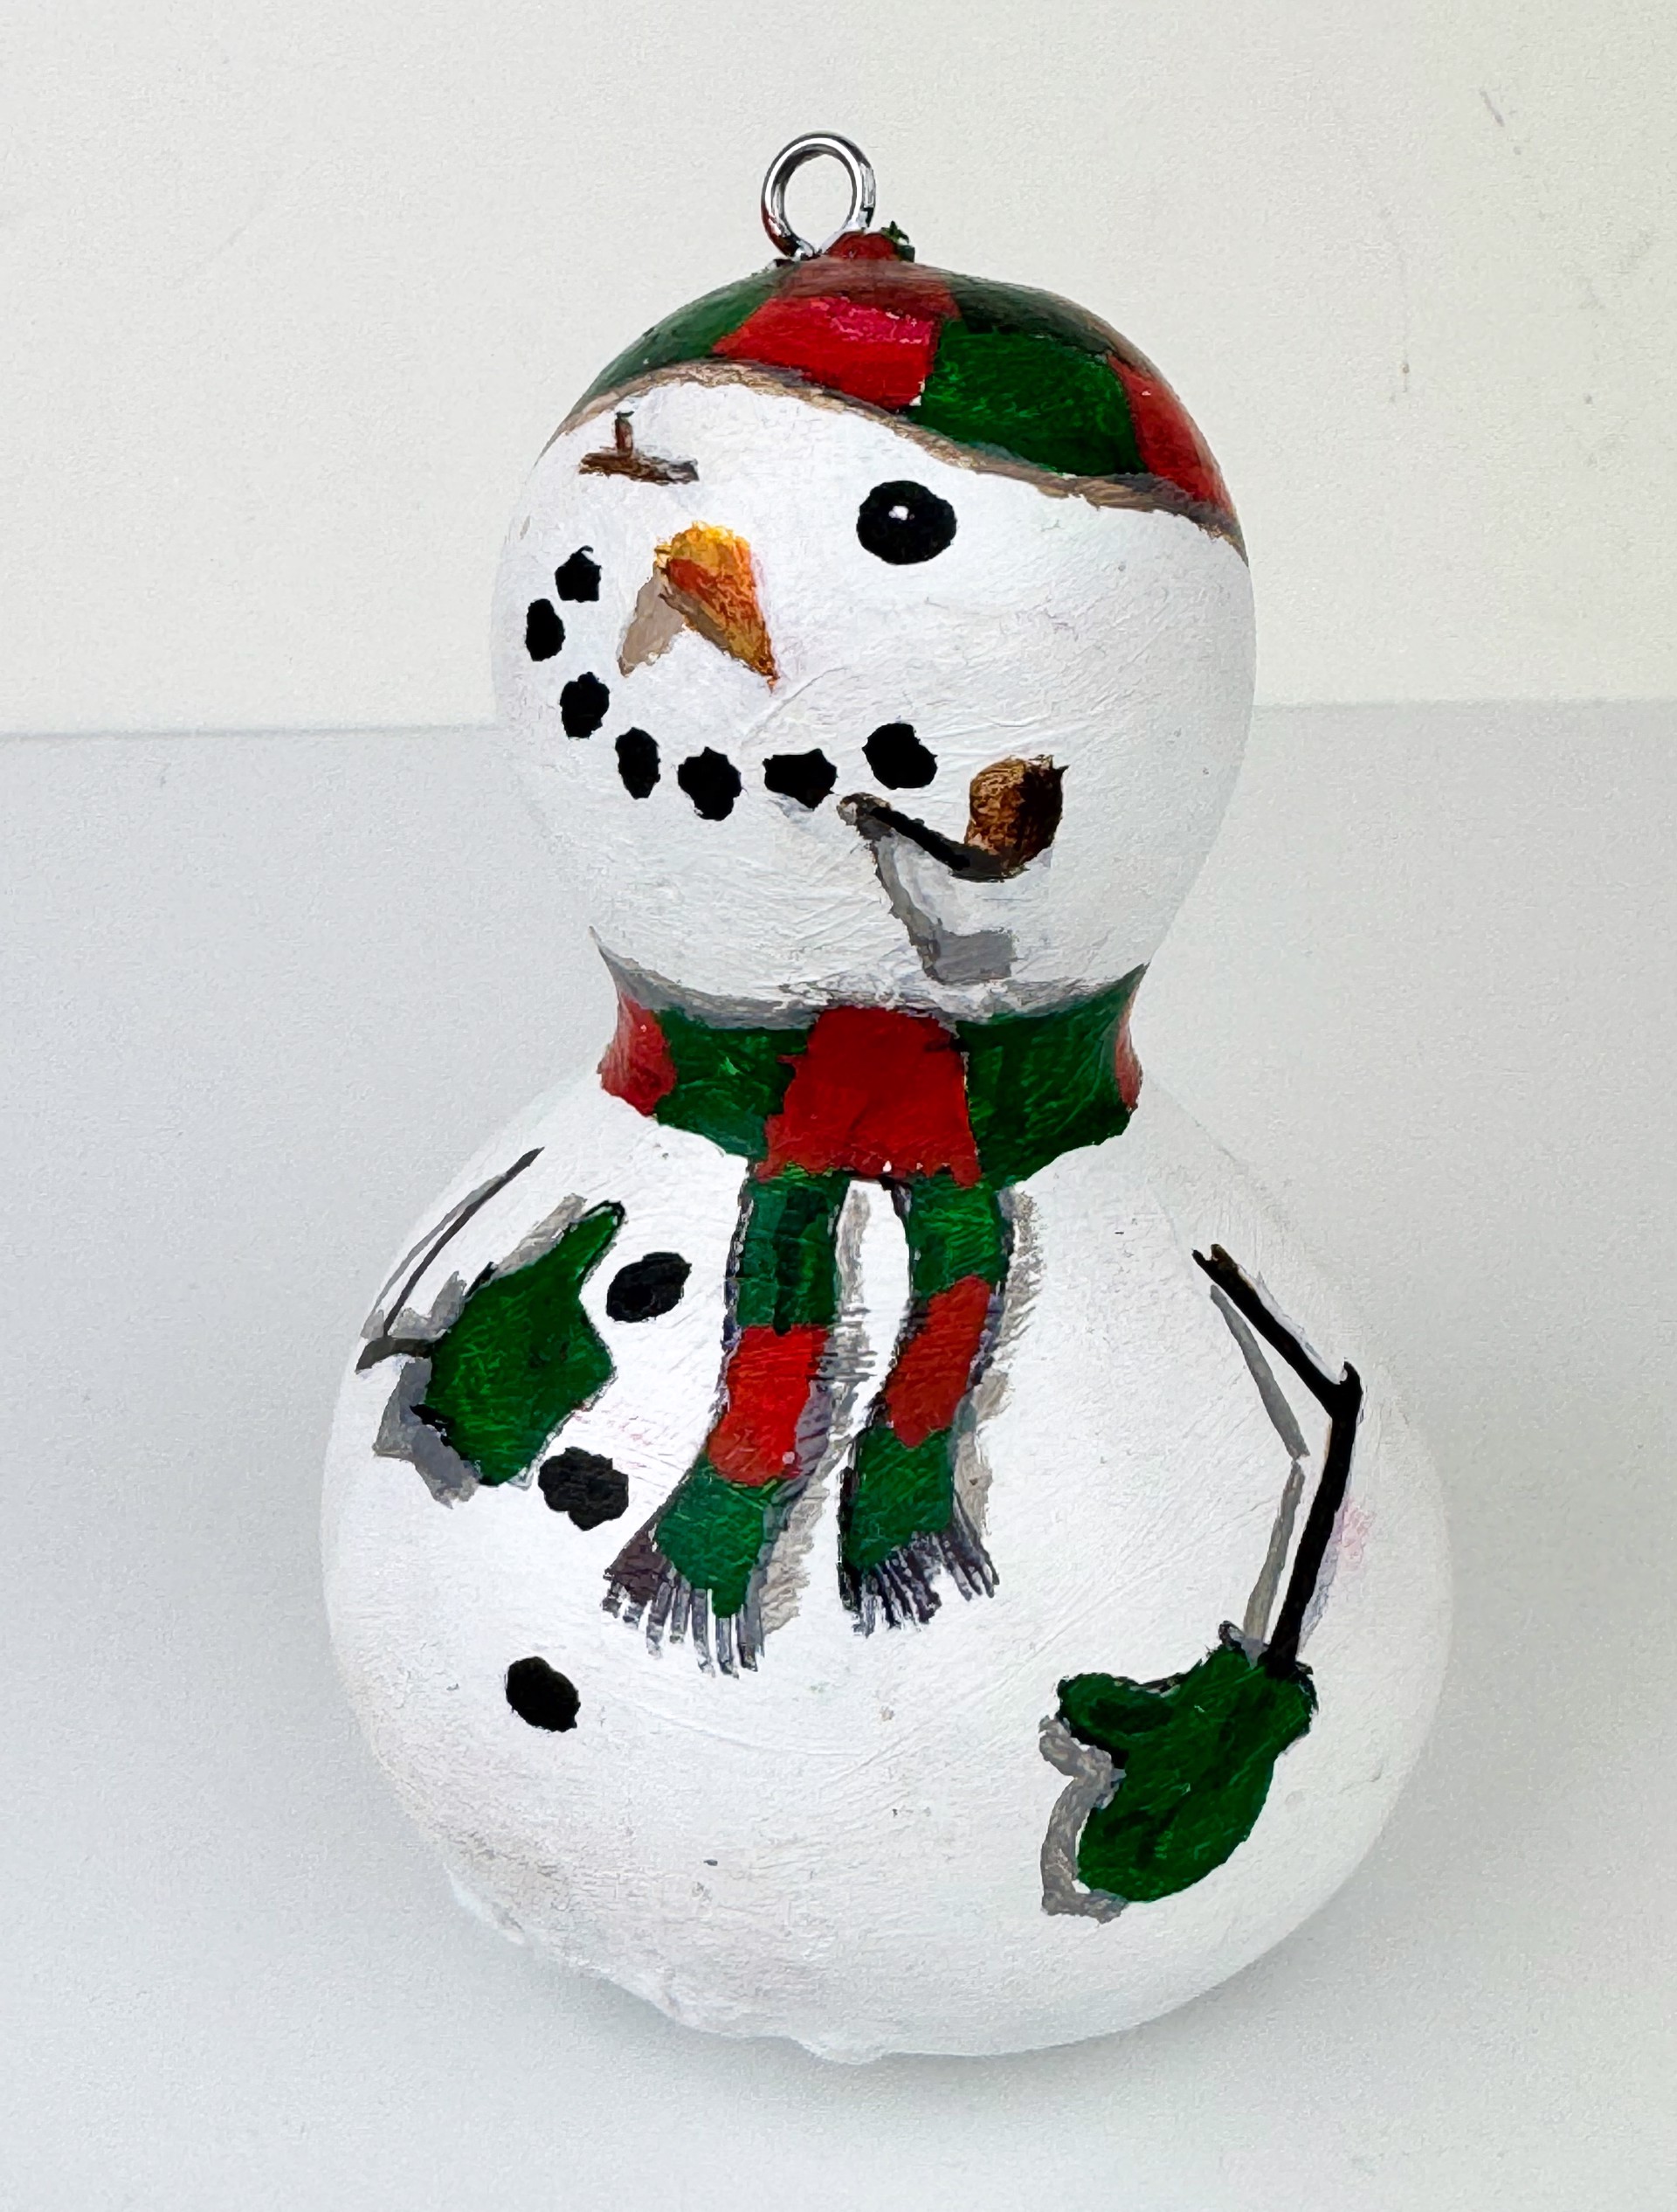 Winking Snowman by Mike Knox